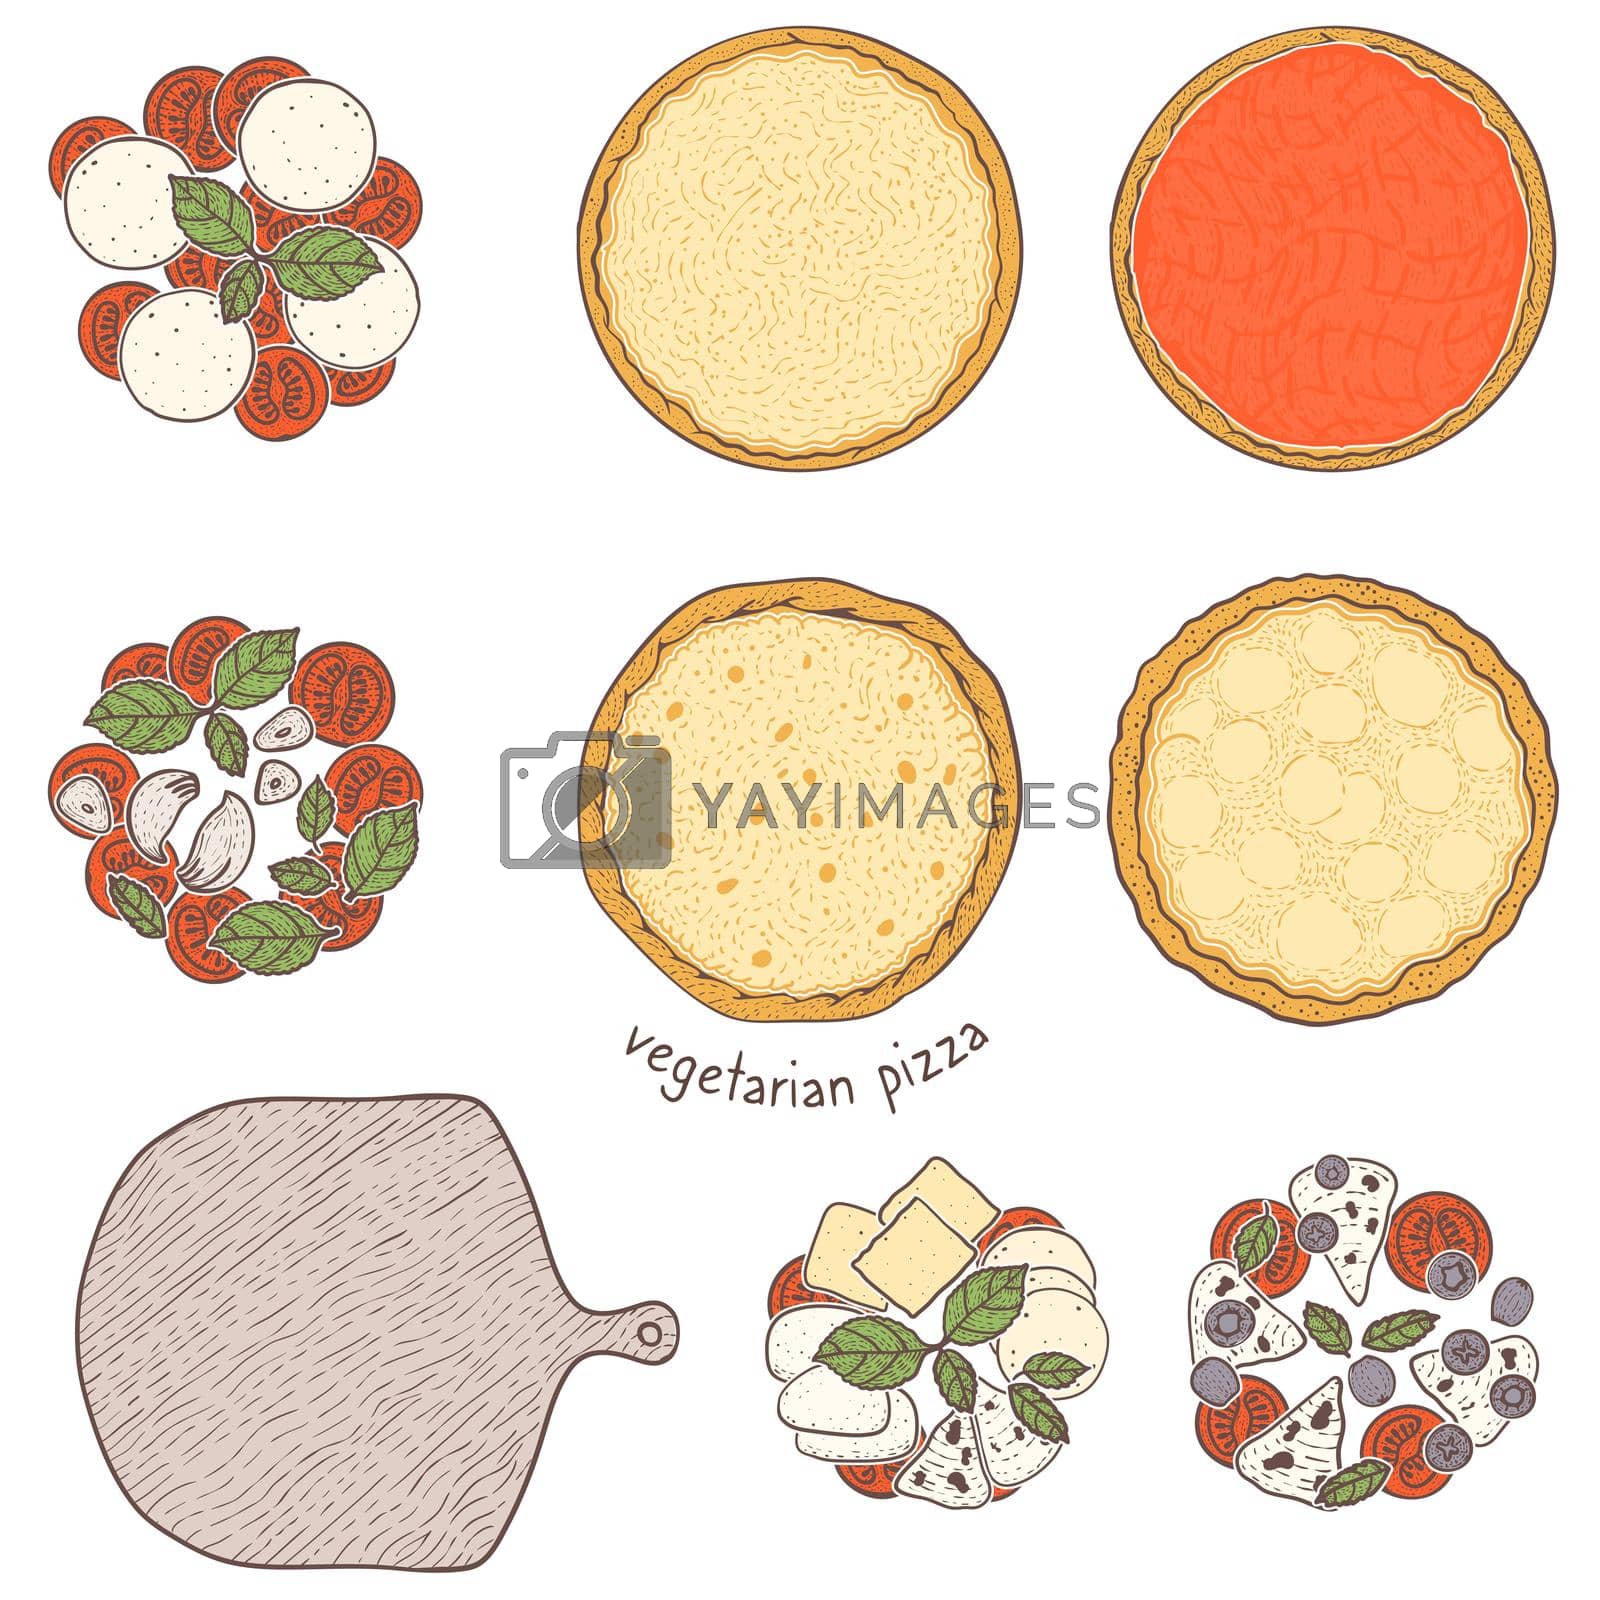 Royalty free image of Pizza crust and vegetarian topping by Xeniasnowstorm